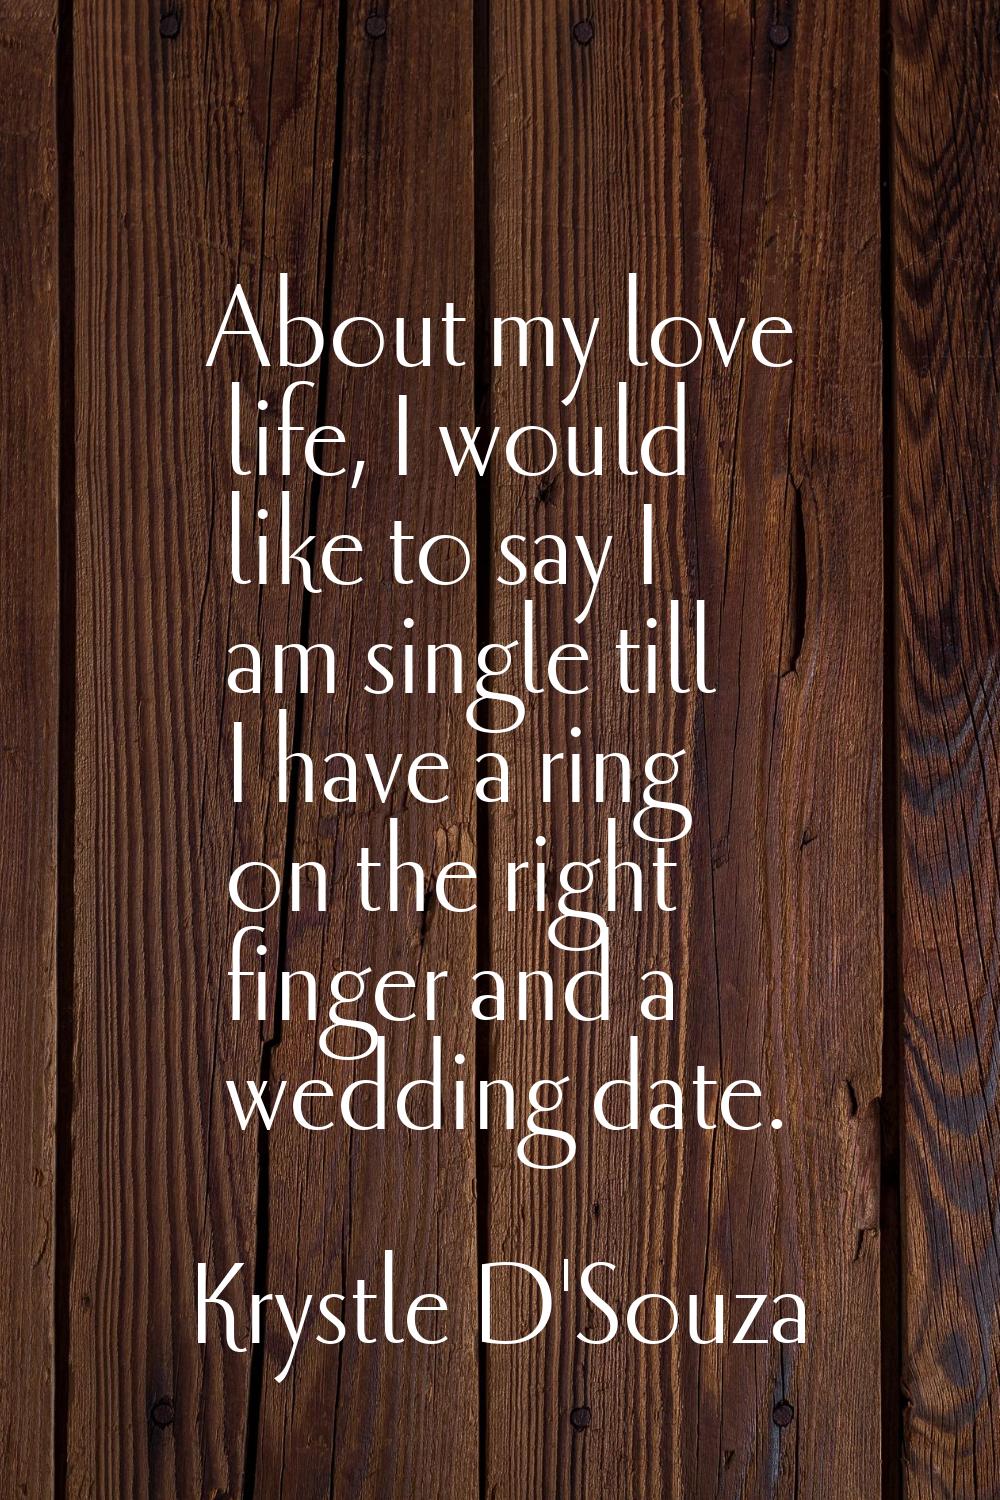 About my love life, I would like to say I am single till I have a ring on the right finger and a we